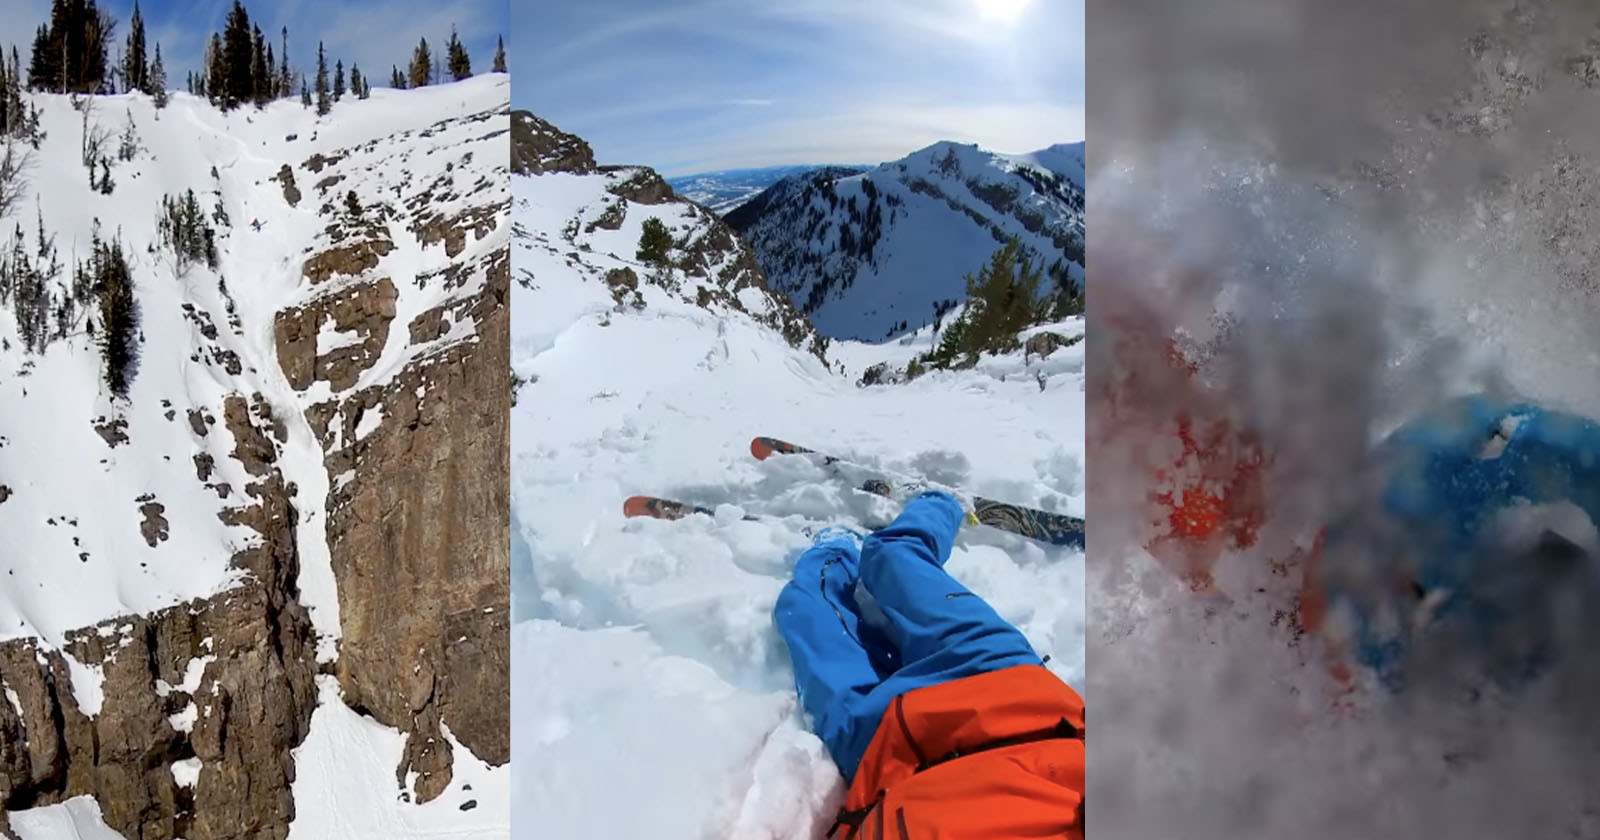  skier captures scary pov footage avalanche throws him 